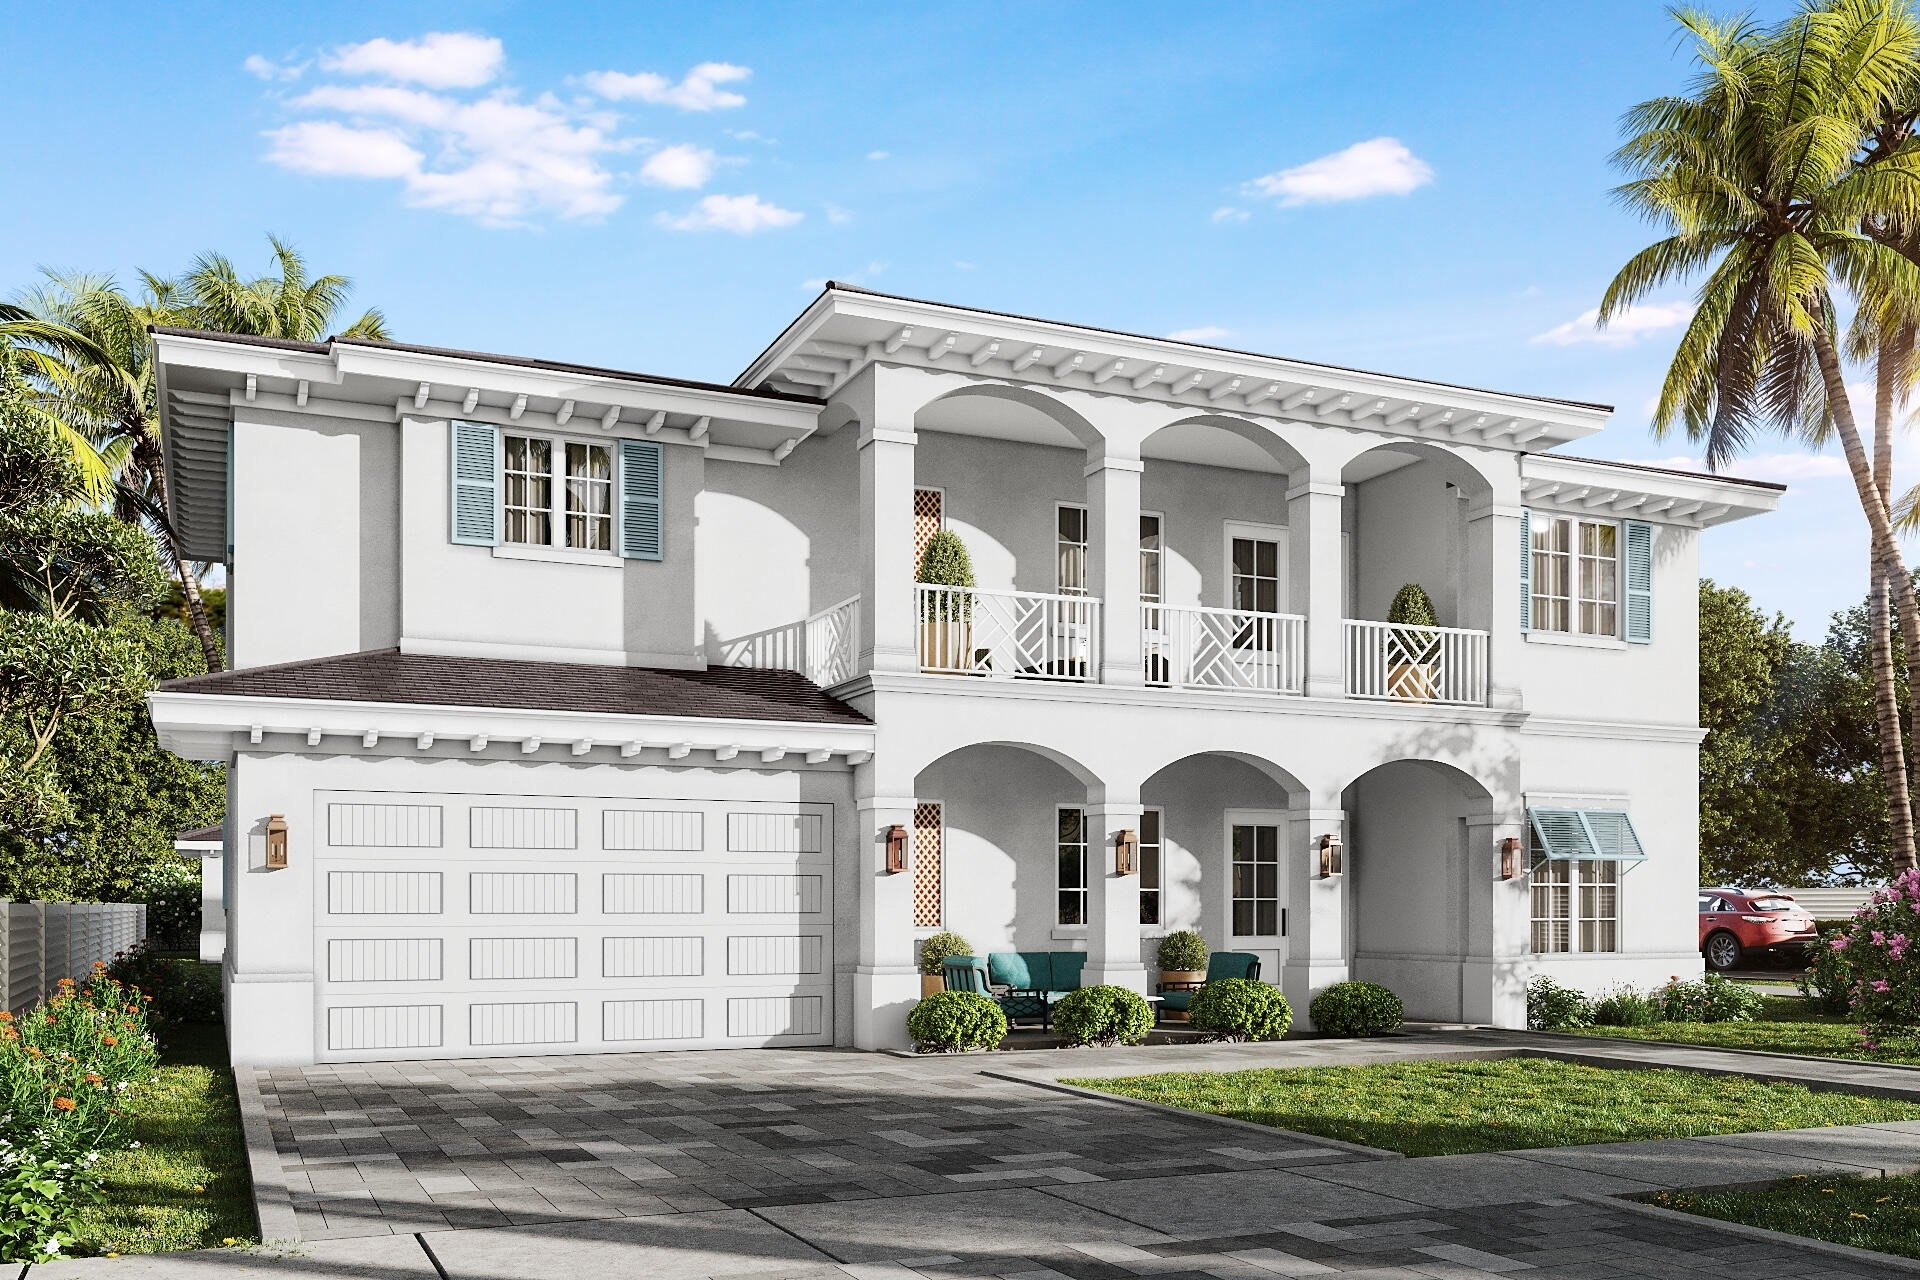 Single Family Home for Sale at South End, West Palm Beach, FL 33405